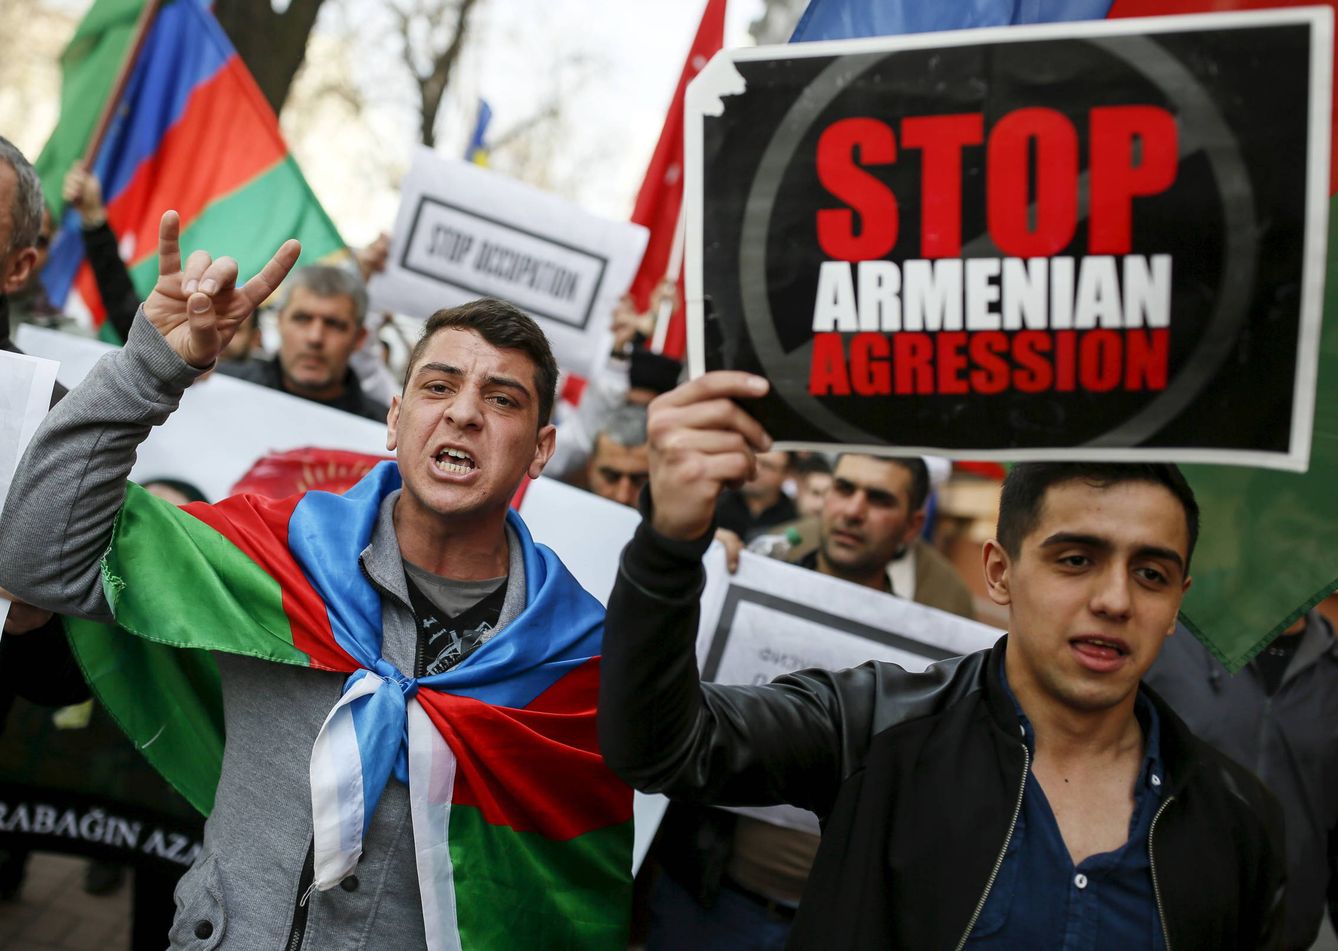 People take part in a rally in support of Azerbaijan over the conflict in the breakaway Nagorno-Karabakh region, outside the Armenian embassy in Kiev, Ukraine, April 8, 2016.  REUTERS/Gleb Garanich - GF10000375767